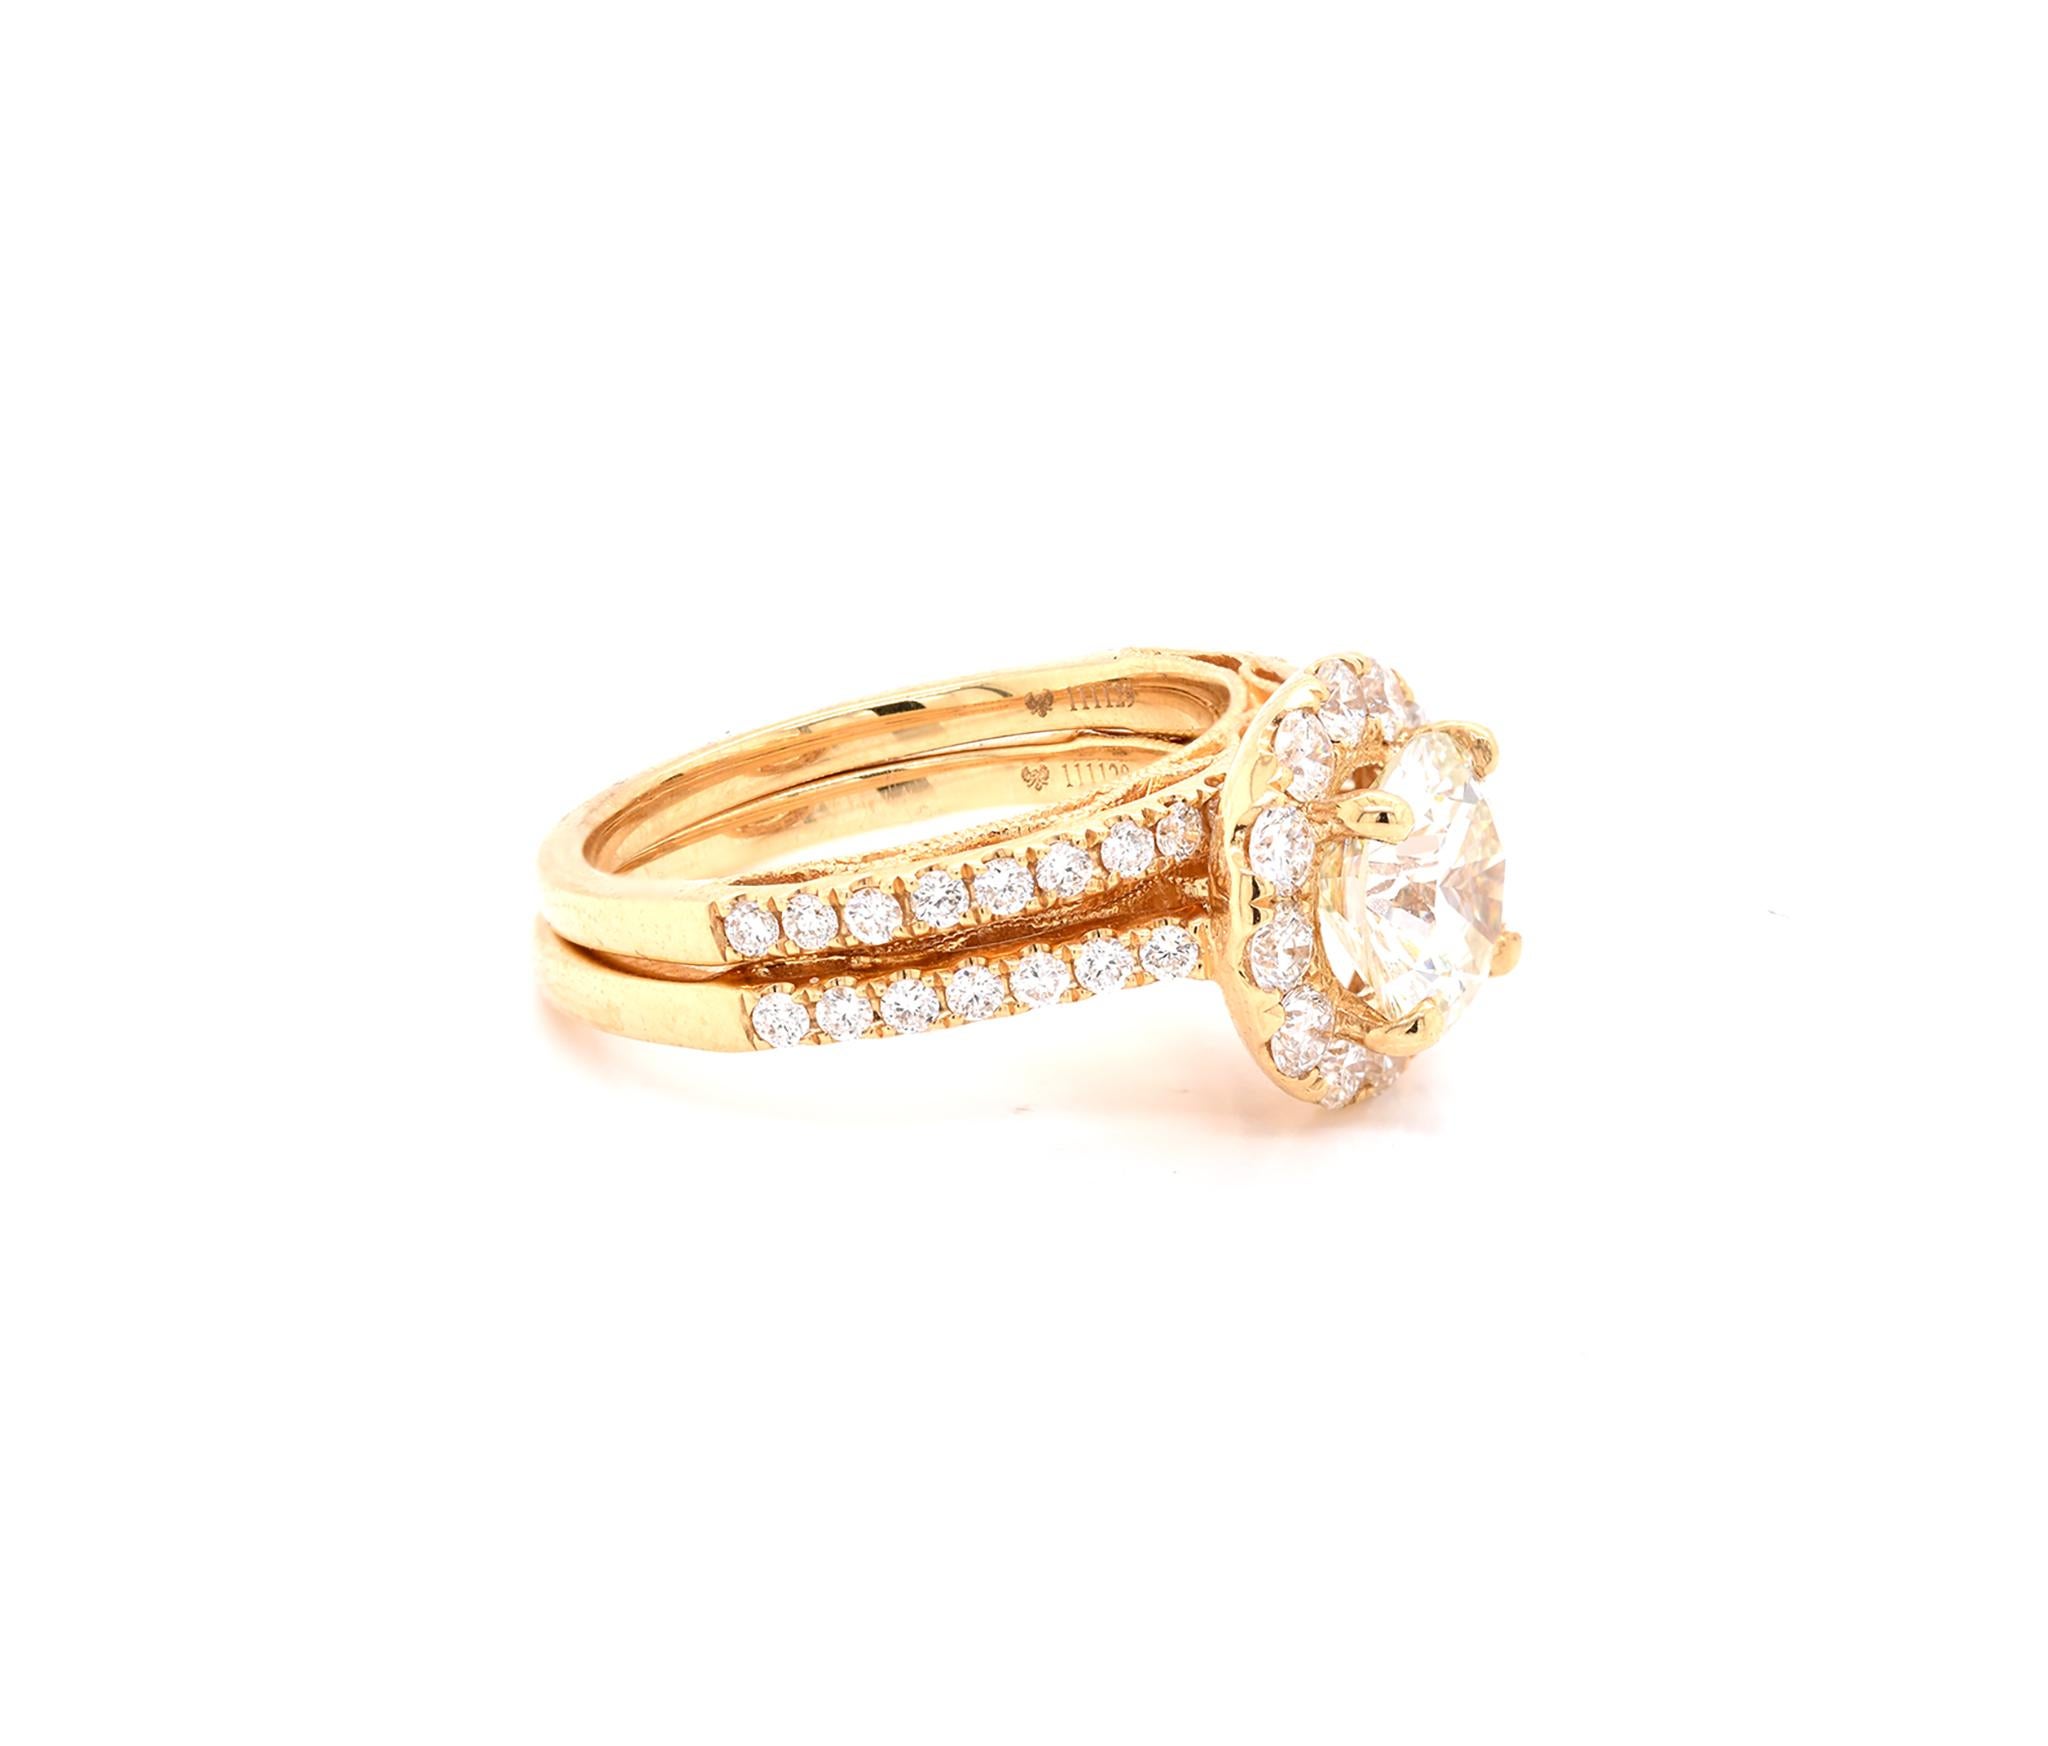 Material: 18K yellow gold
Center Diamond: 1 round brilliant cut = 1.80ct
Color: L
Clarity: VS1
Diamonds: 47 round cut = 1.11cttw
Color: G
Clarity:  VS
Ring Size: 7 (please allow up to 2 additional business days for sizing requests)
Dimensions: ring